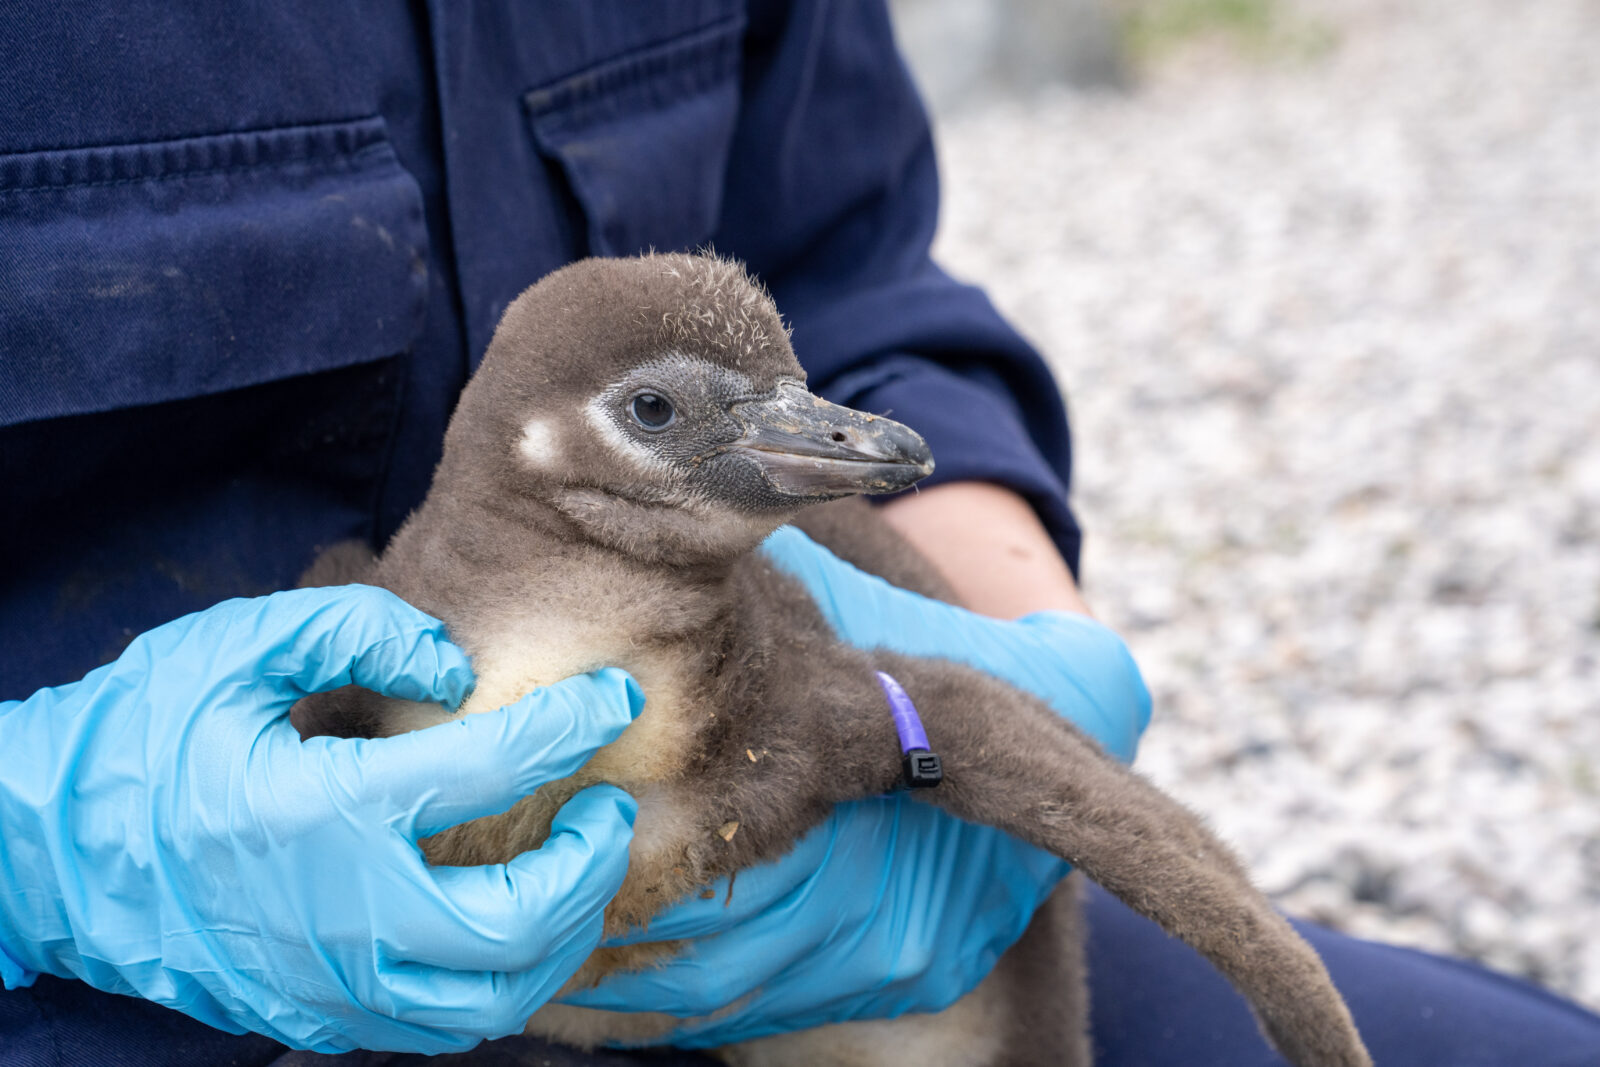 A Chester Zoo keeper handing one of the new baby penguins